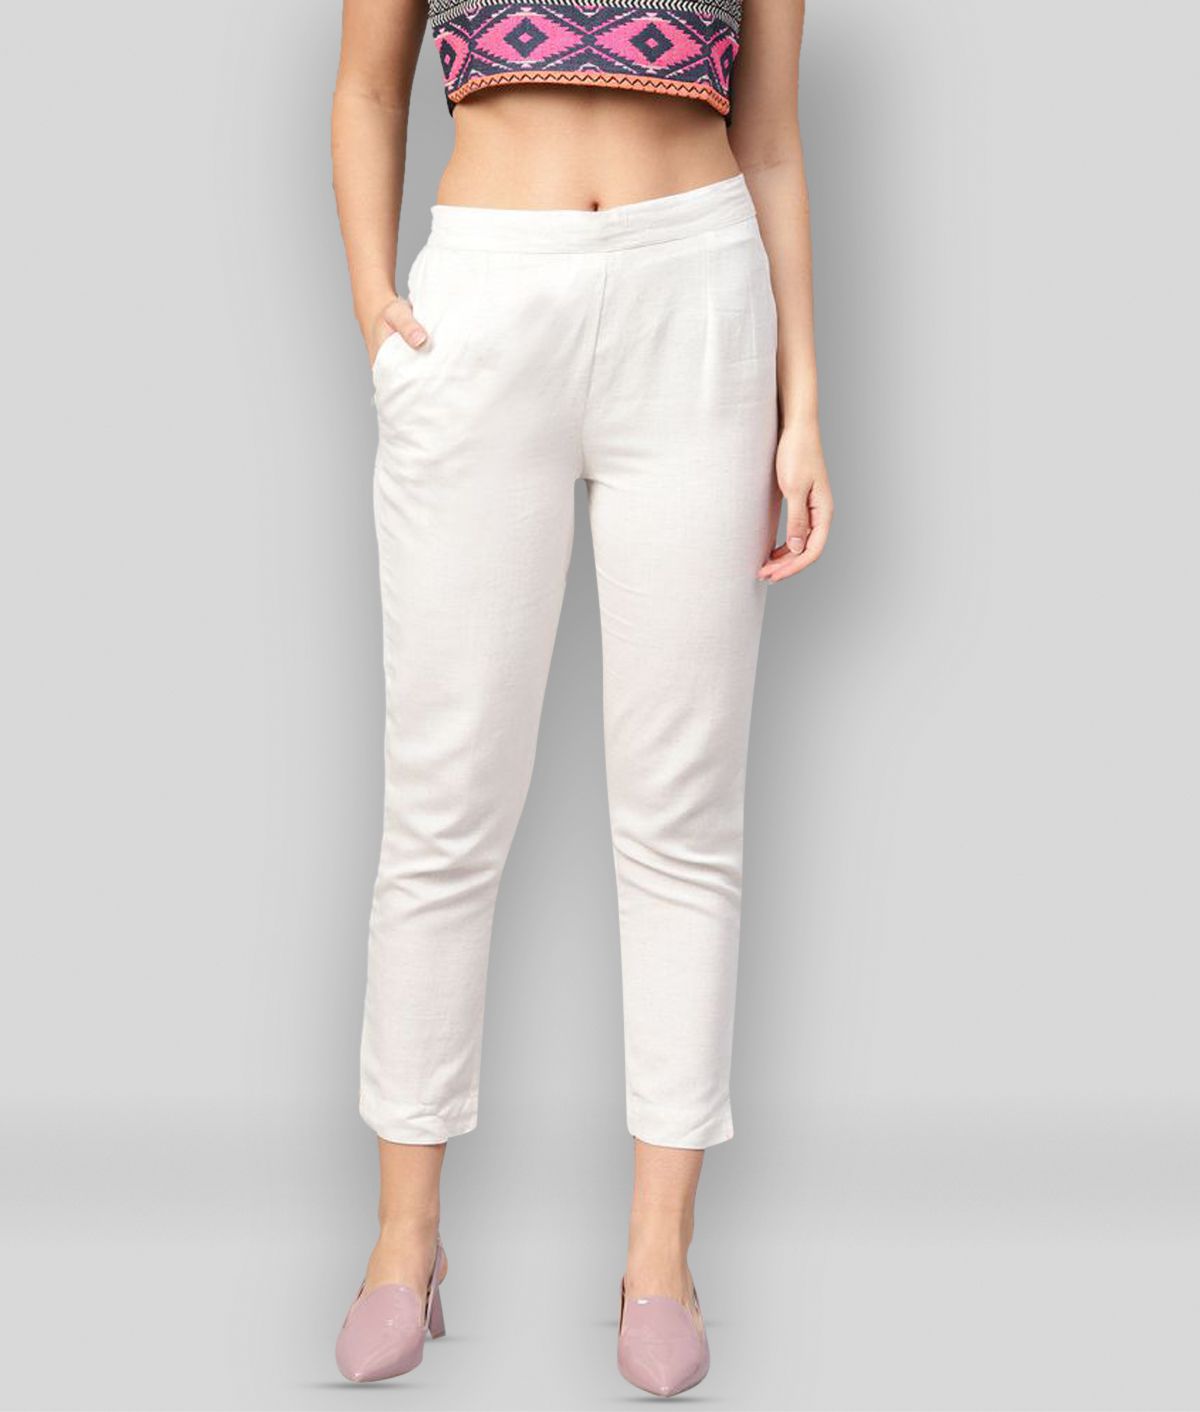     			Juniper - Off White Rayon Slim Fit Women's Casual Pants  ( Pack of 1 )